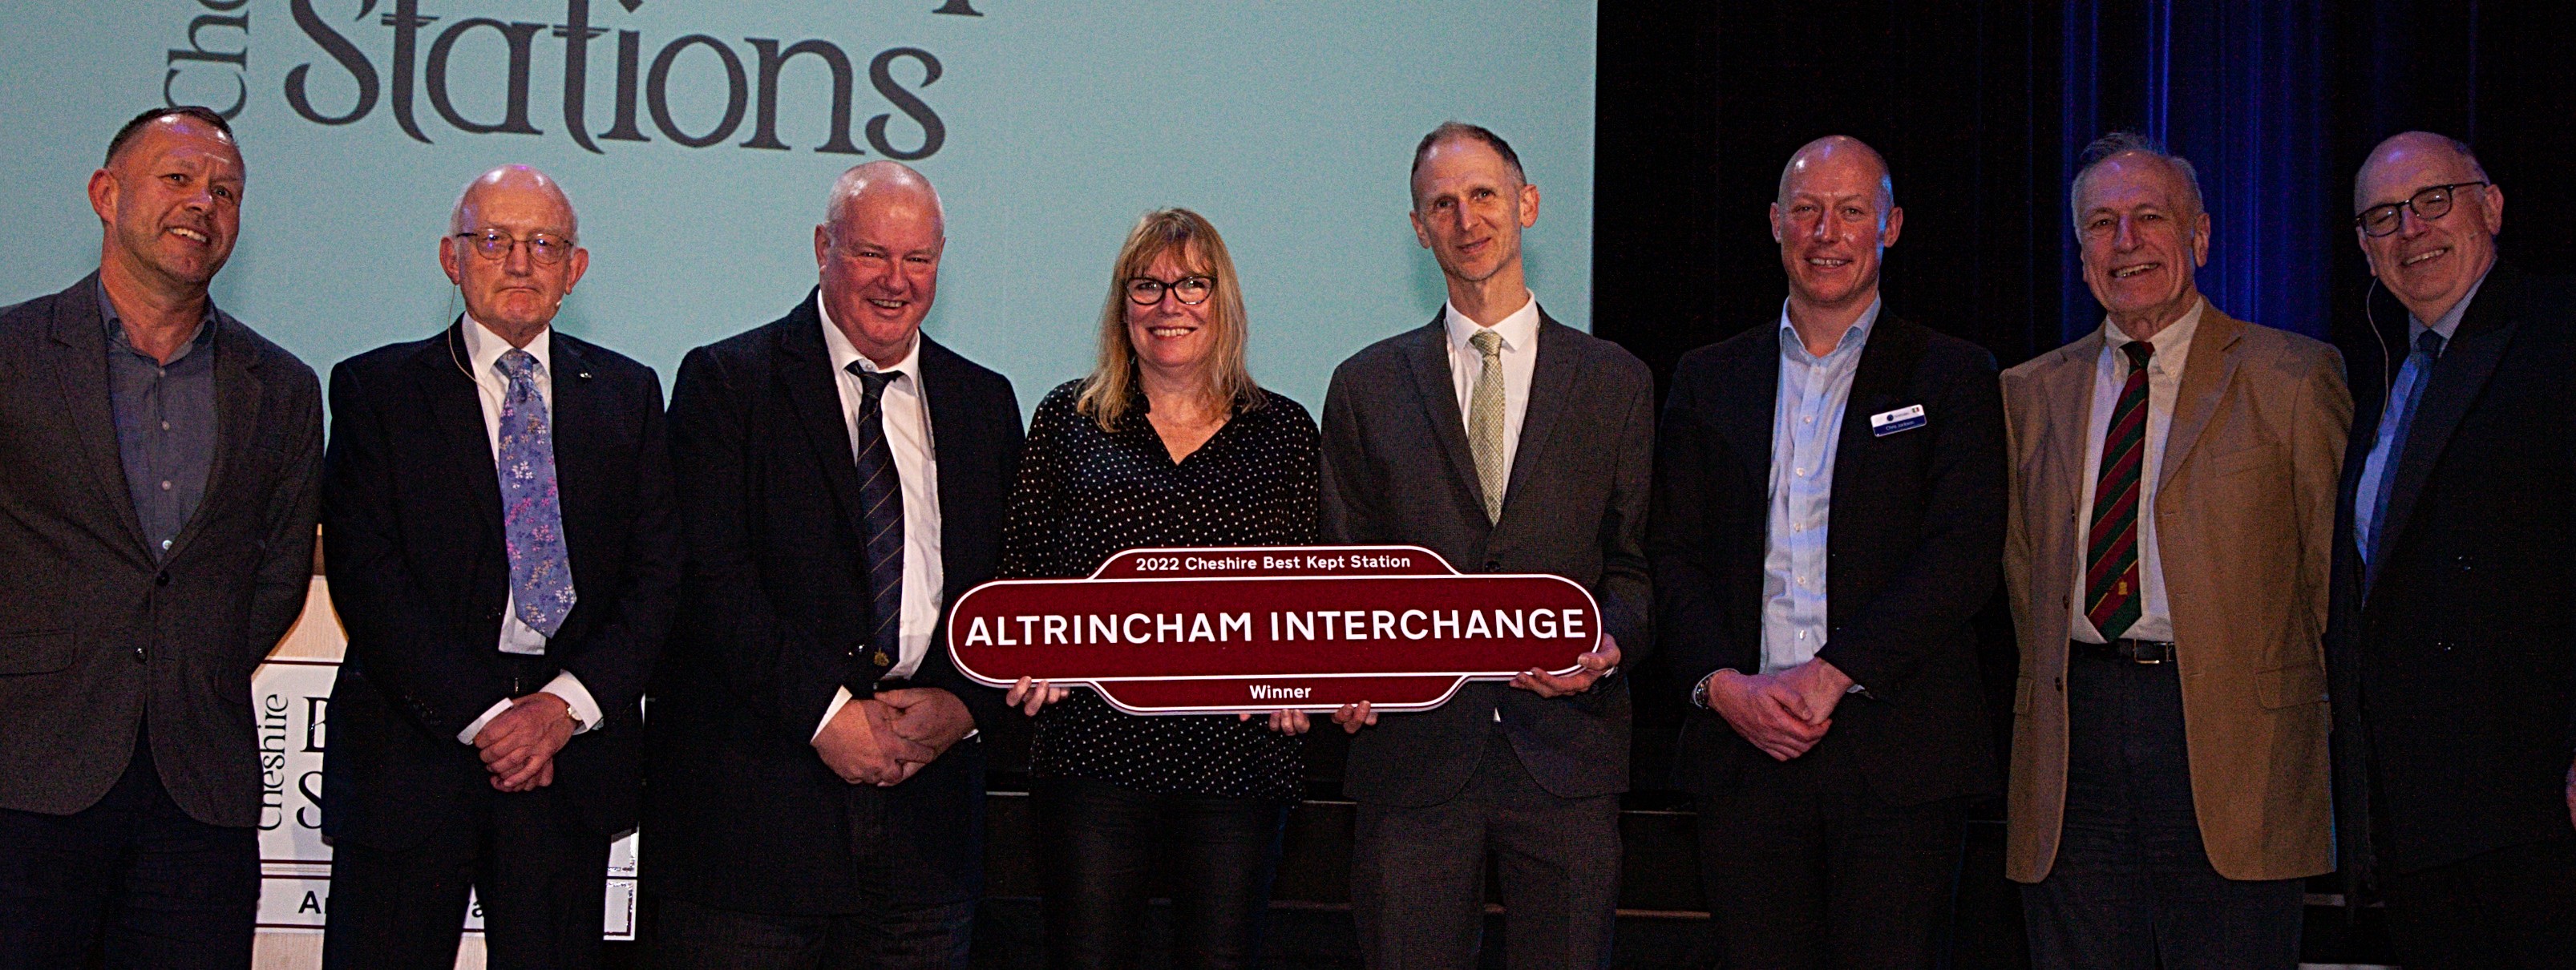 this-image-shows-the-altrincham-winners-of-the-best-kept-station